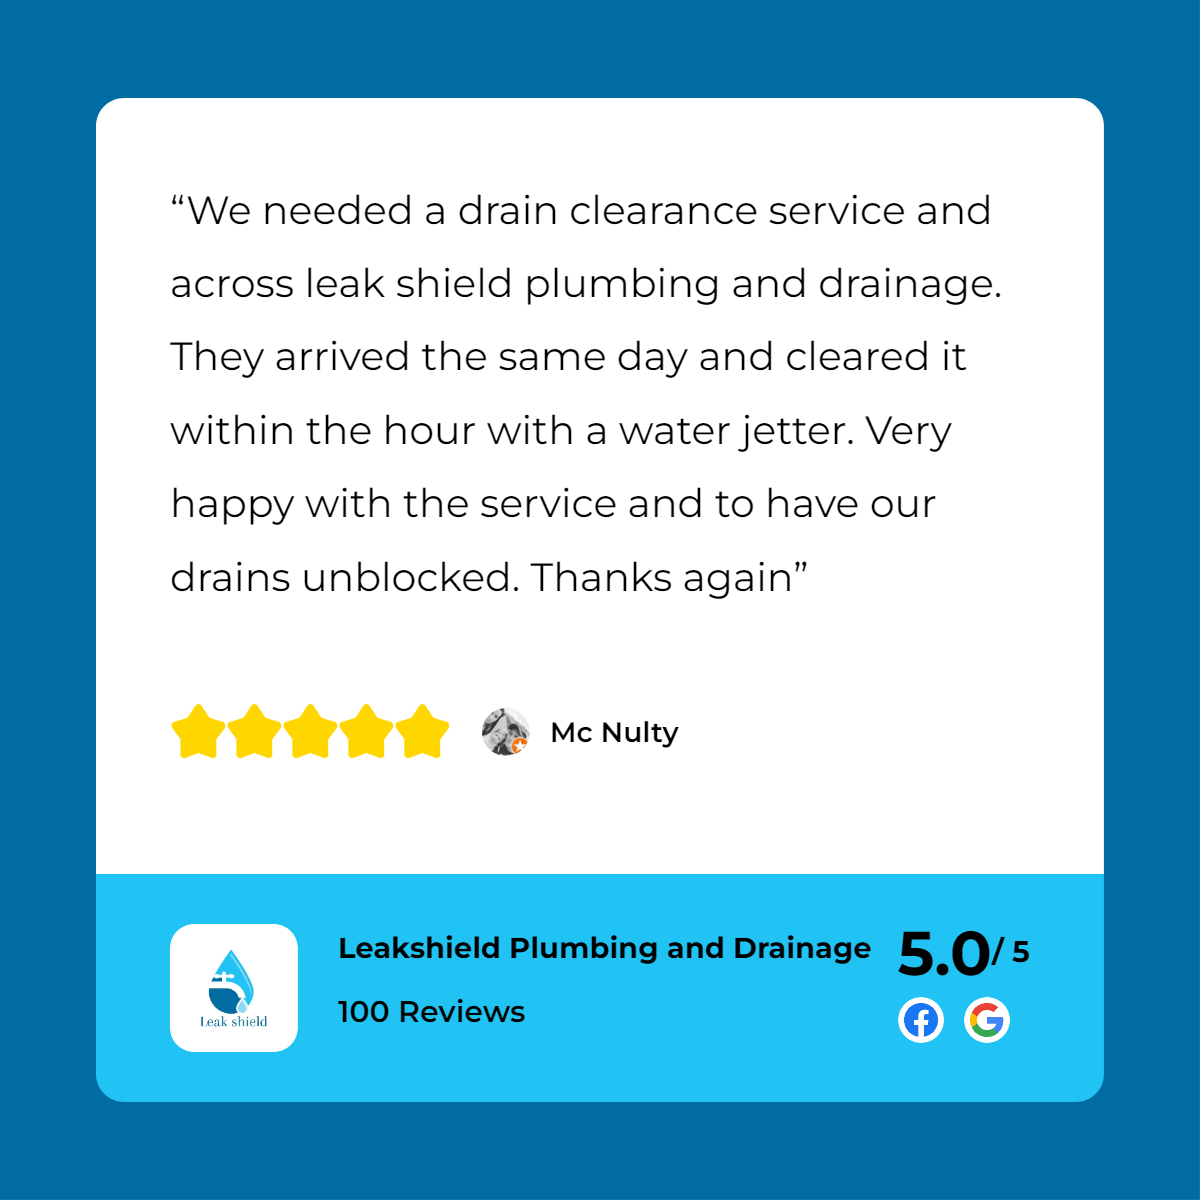 A customer review of a plumbing company with a five star rating.